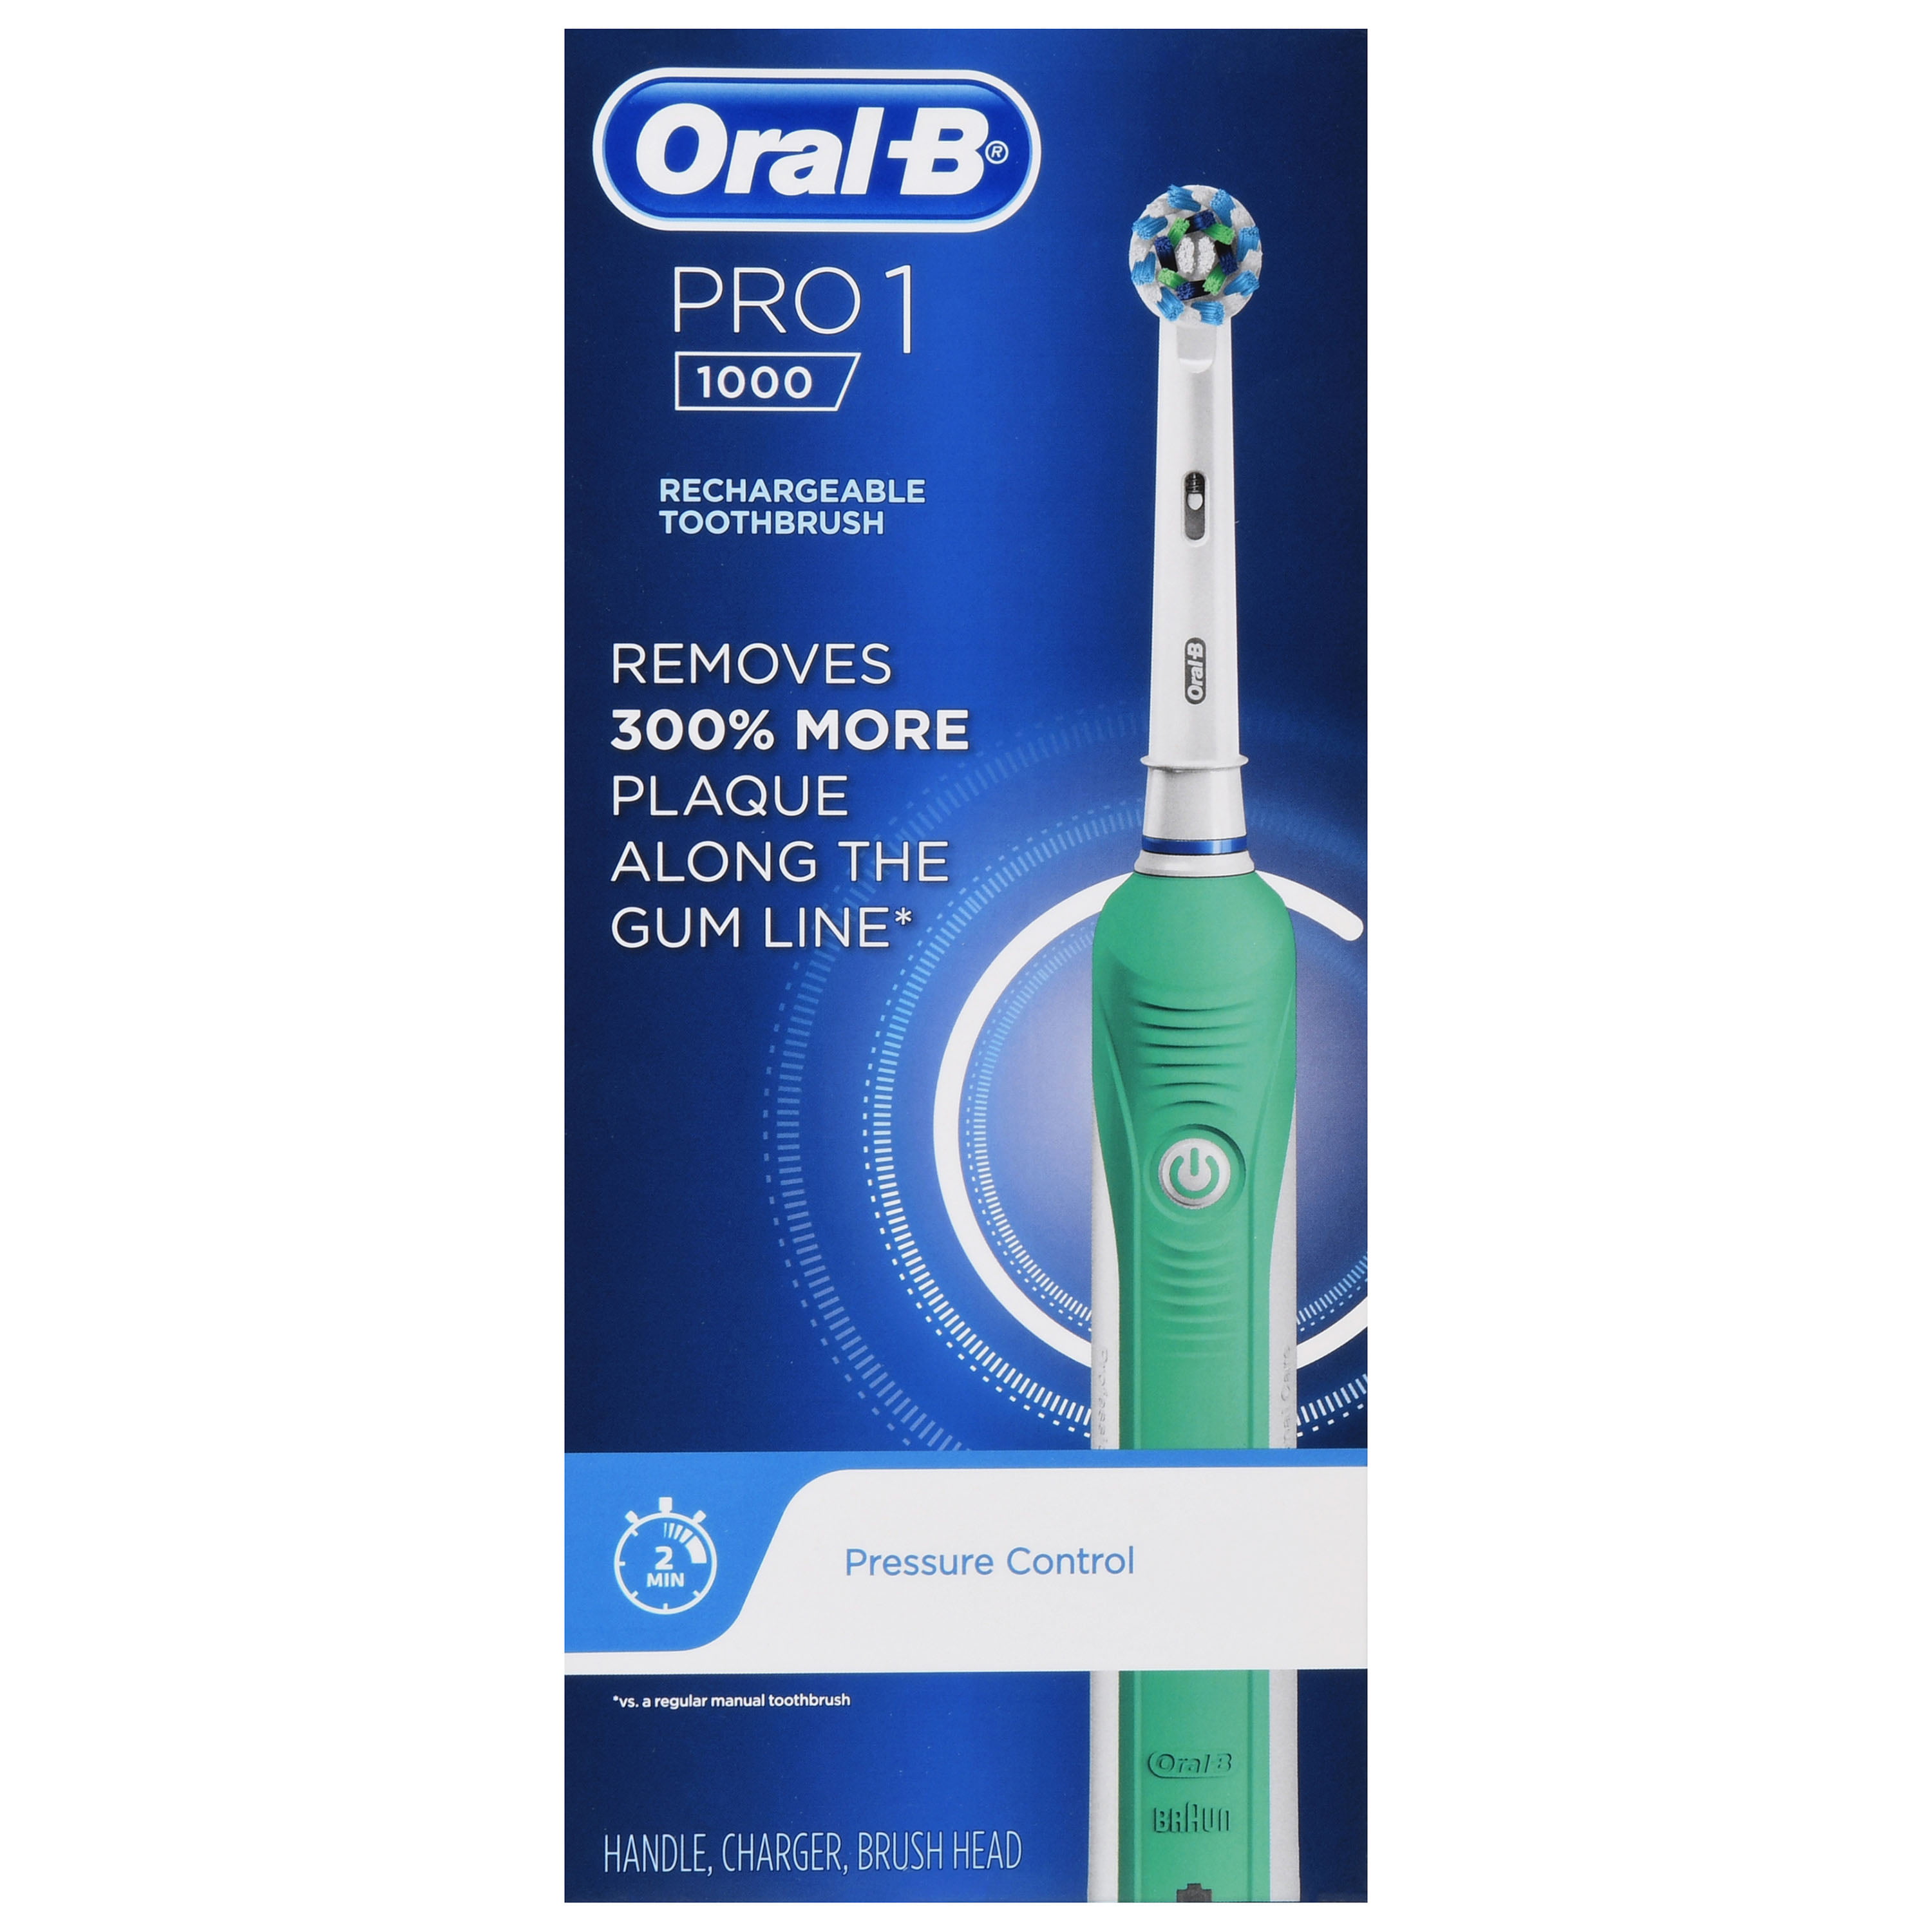 oral-b-pro-1000-electric-toothbrush-rechargeable-green-walmart